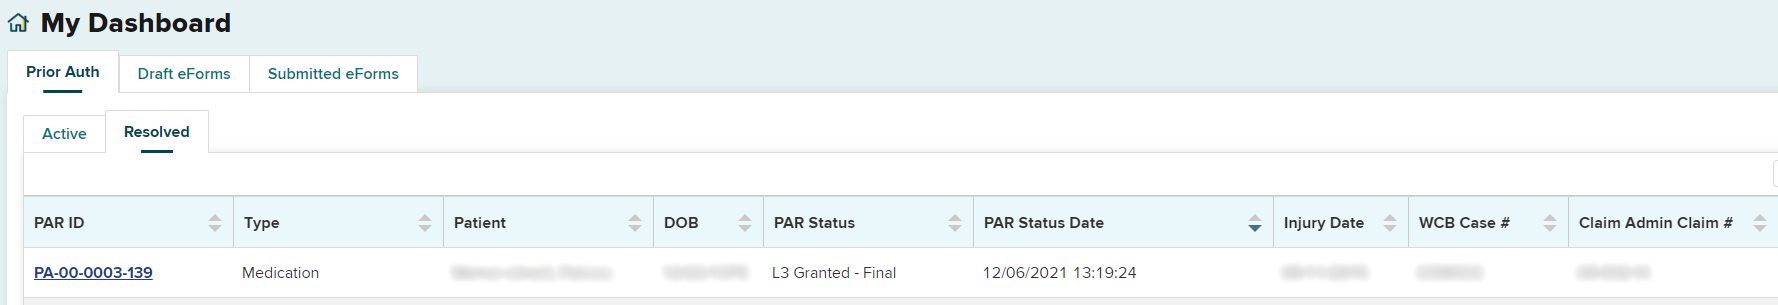 Dashboard Resolved tab with PAR Status column showing L3 Granted Final